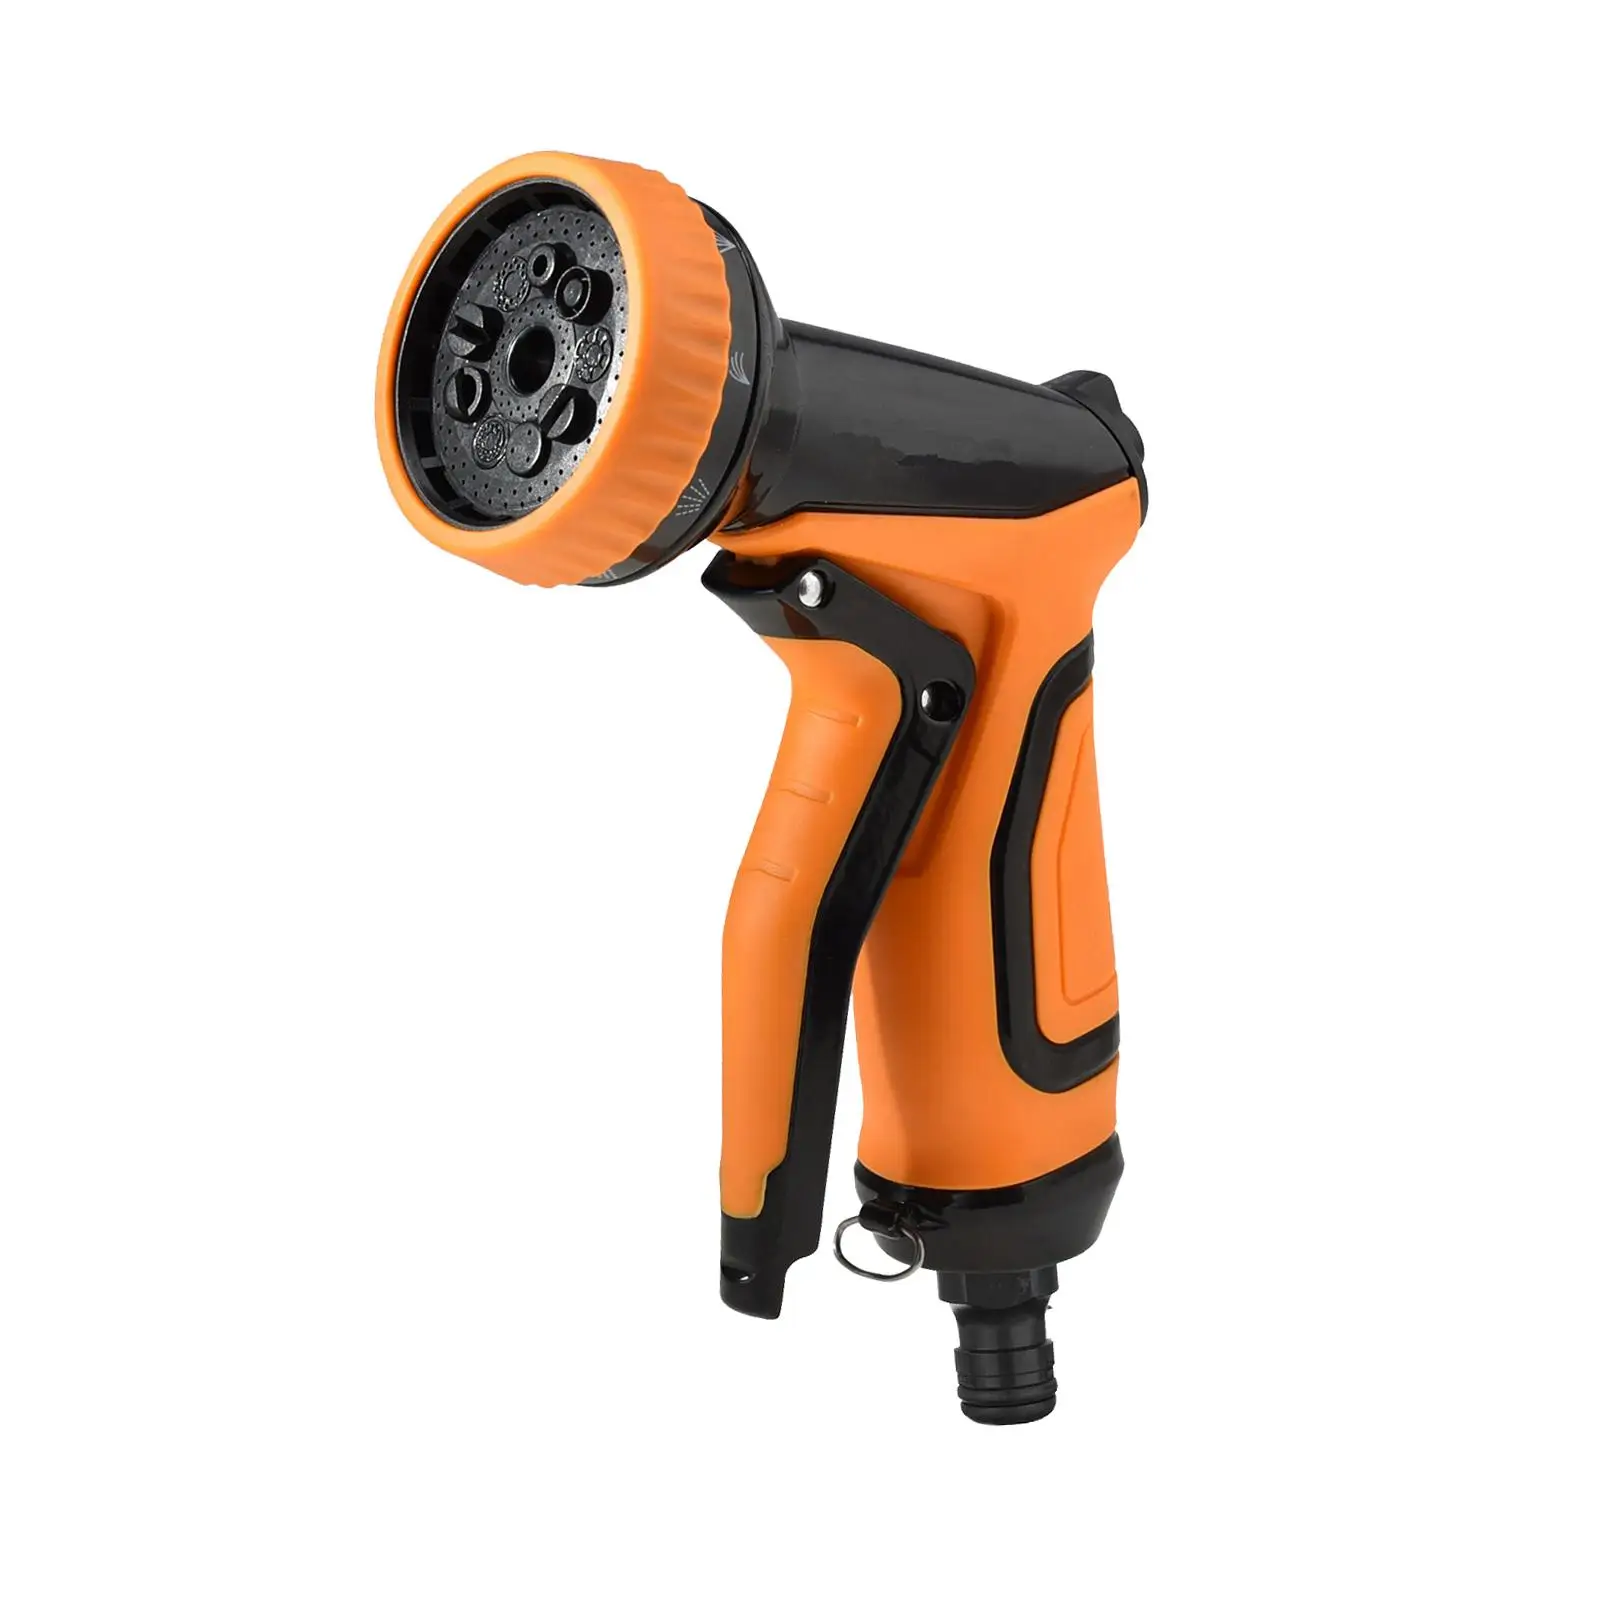 Hose Spray Nozzle Adjustable with 9 Patterns Heavy Duty for Lawn Pet Window